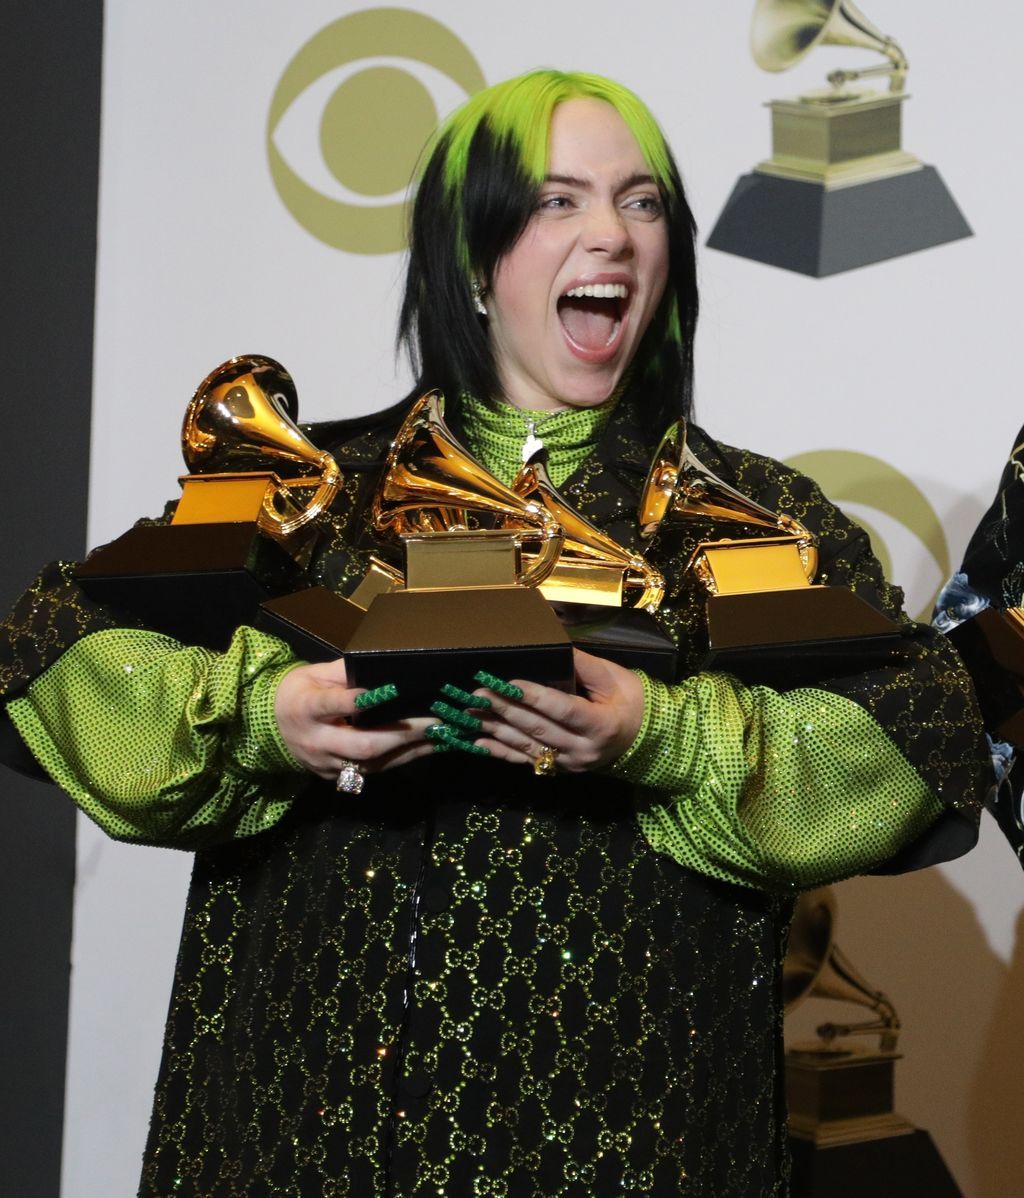 EuropaPress_2615057_January_26_2020_-_Los_Angeles_California_United_States__Billie_Eilish_in_the_press_room_with_the_awards_for_Record_Of_The_Year_Bad_Guy”_Album_Of_The_Year_When_We_Fall_Asleep_Where_D